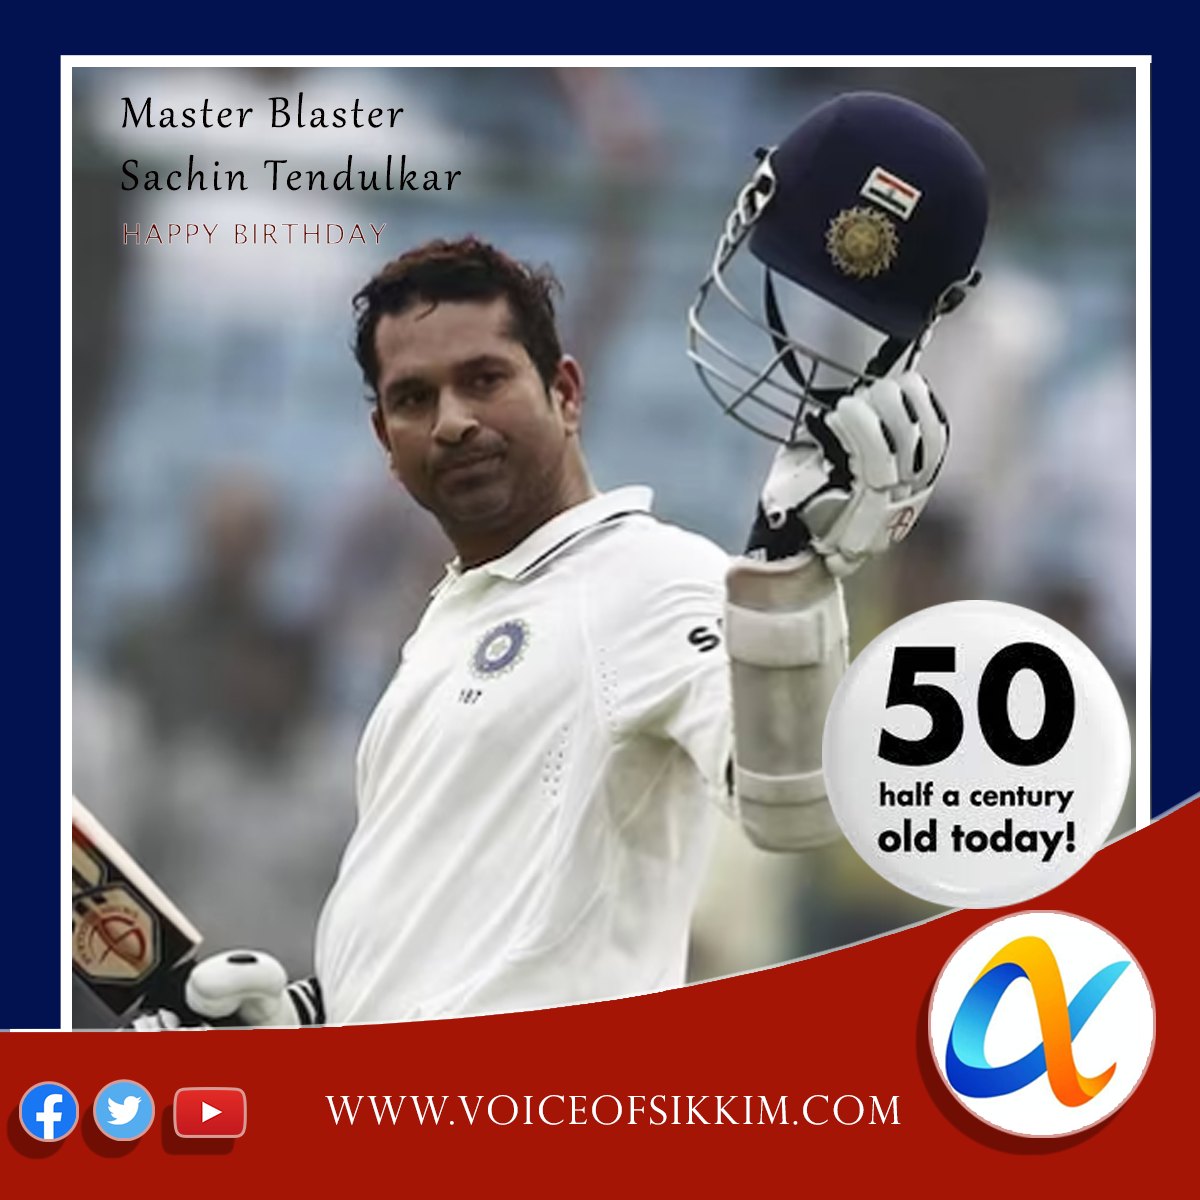 Master Blaster Turns 50, Here're 50 Facts